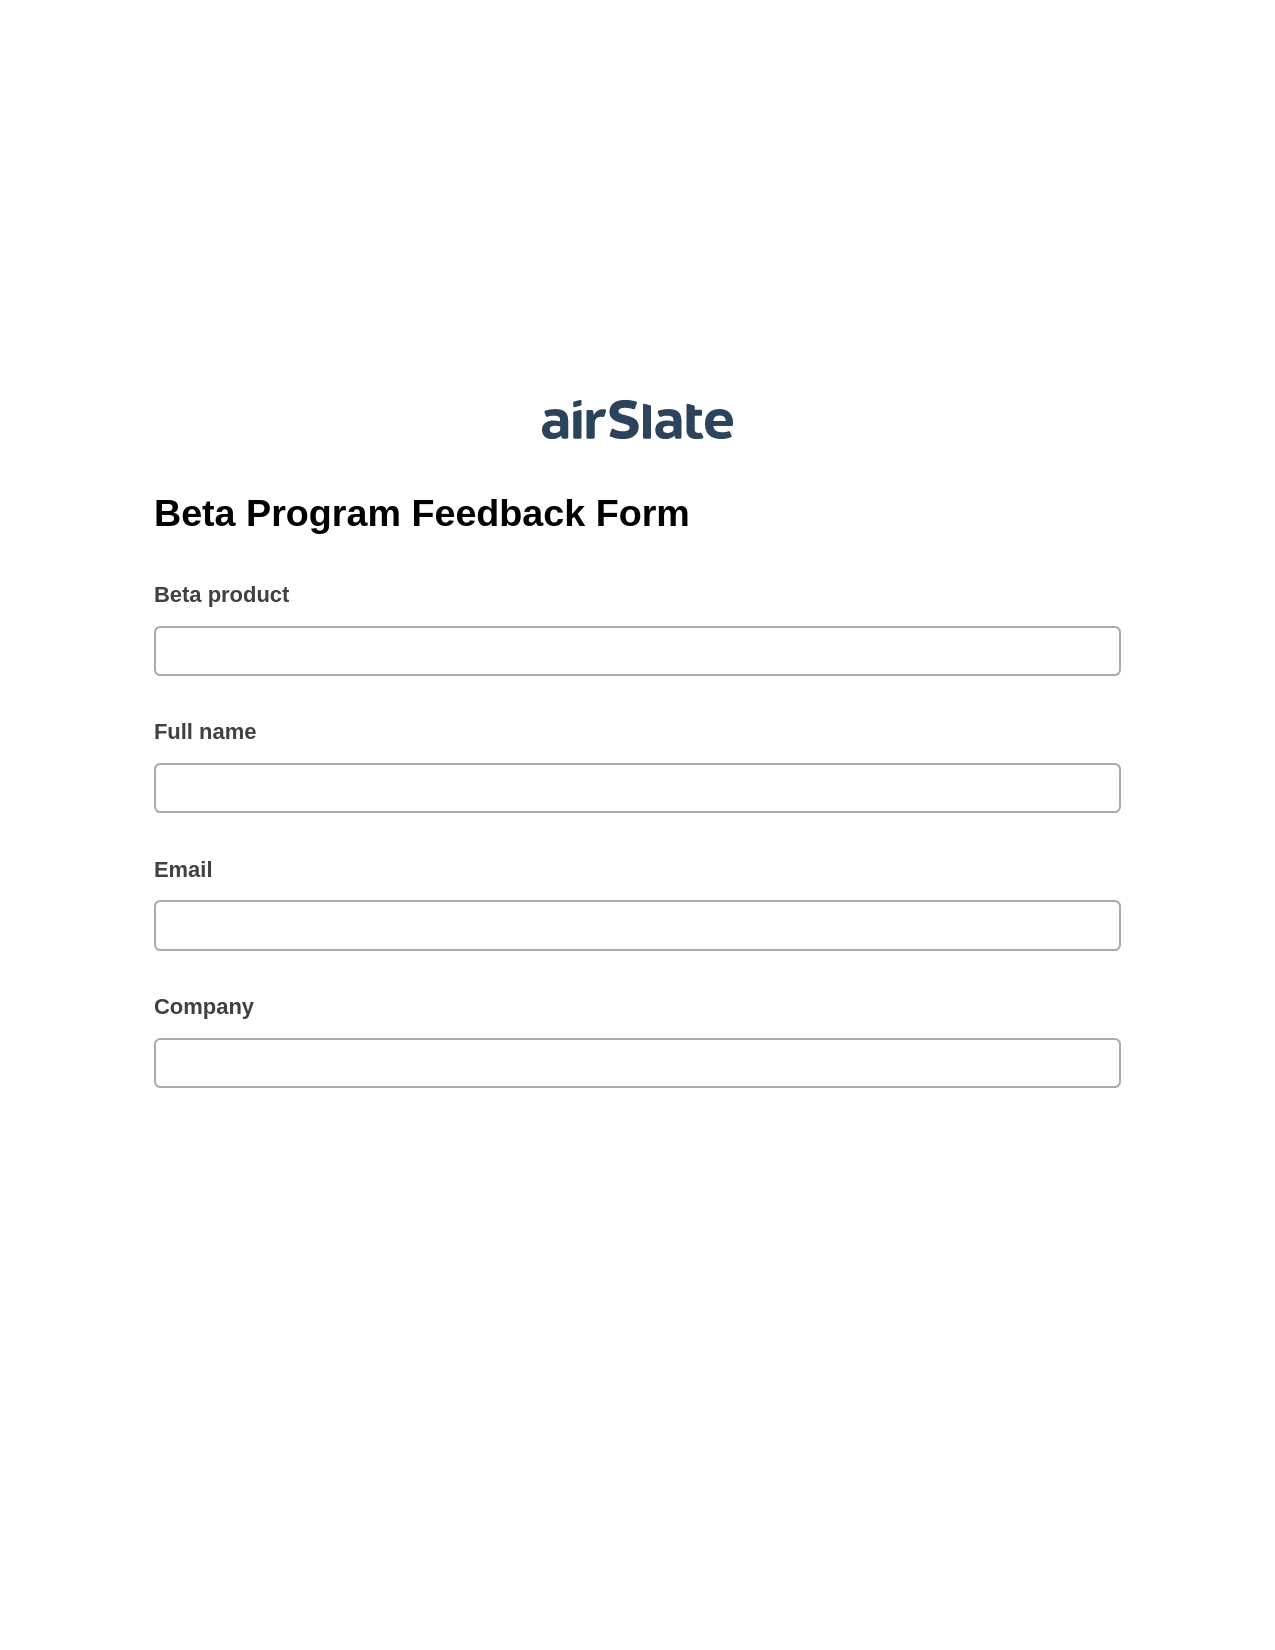 Beta Program Feedback Form Pre-fill from Salesforce Record Bot, Roles Reminder Bot, Export to Google Sheet Bot